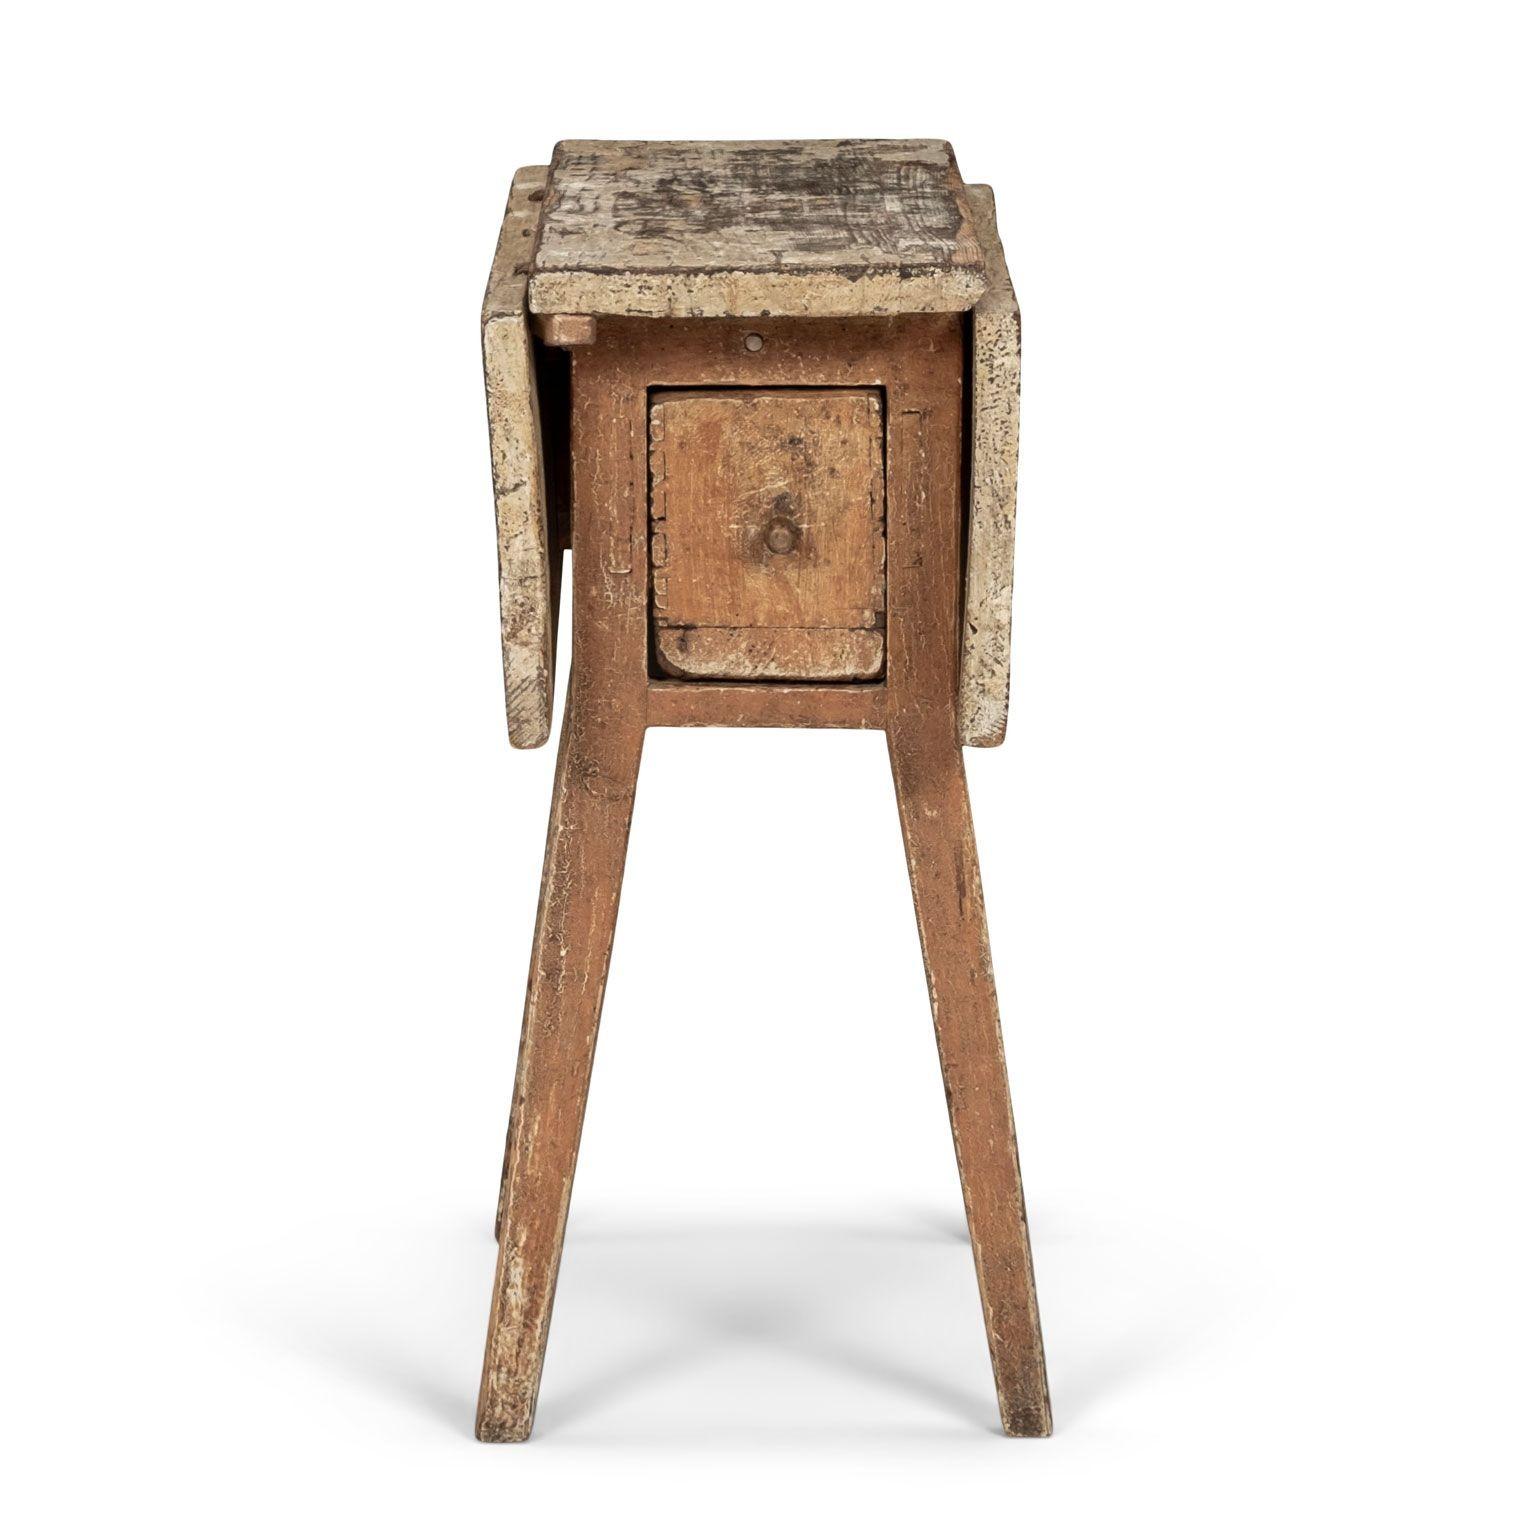 Small Swedish drop-leaf side table with double-sided single drawer in early paint. Sturdy, stable. Circa 1830-1849. Restoration to pull-out supports under drop-leaves.